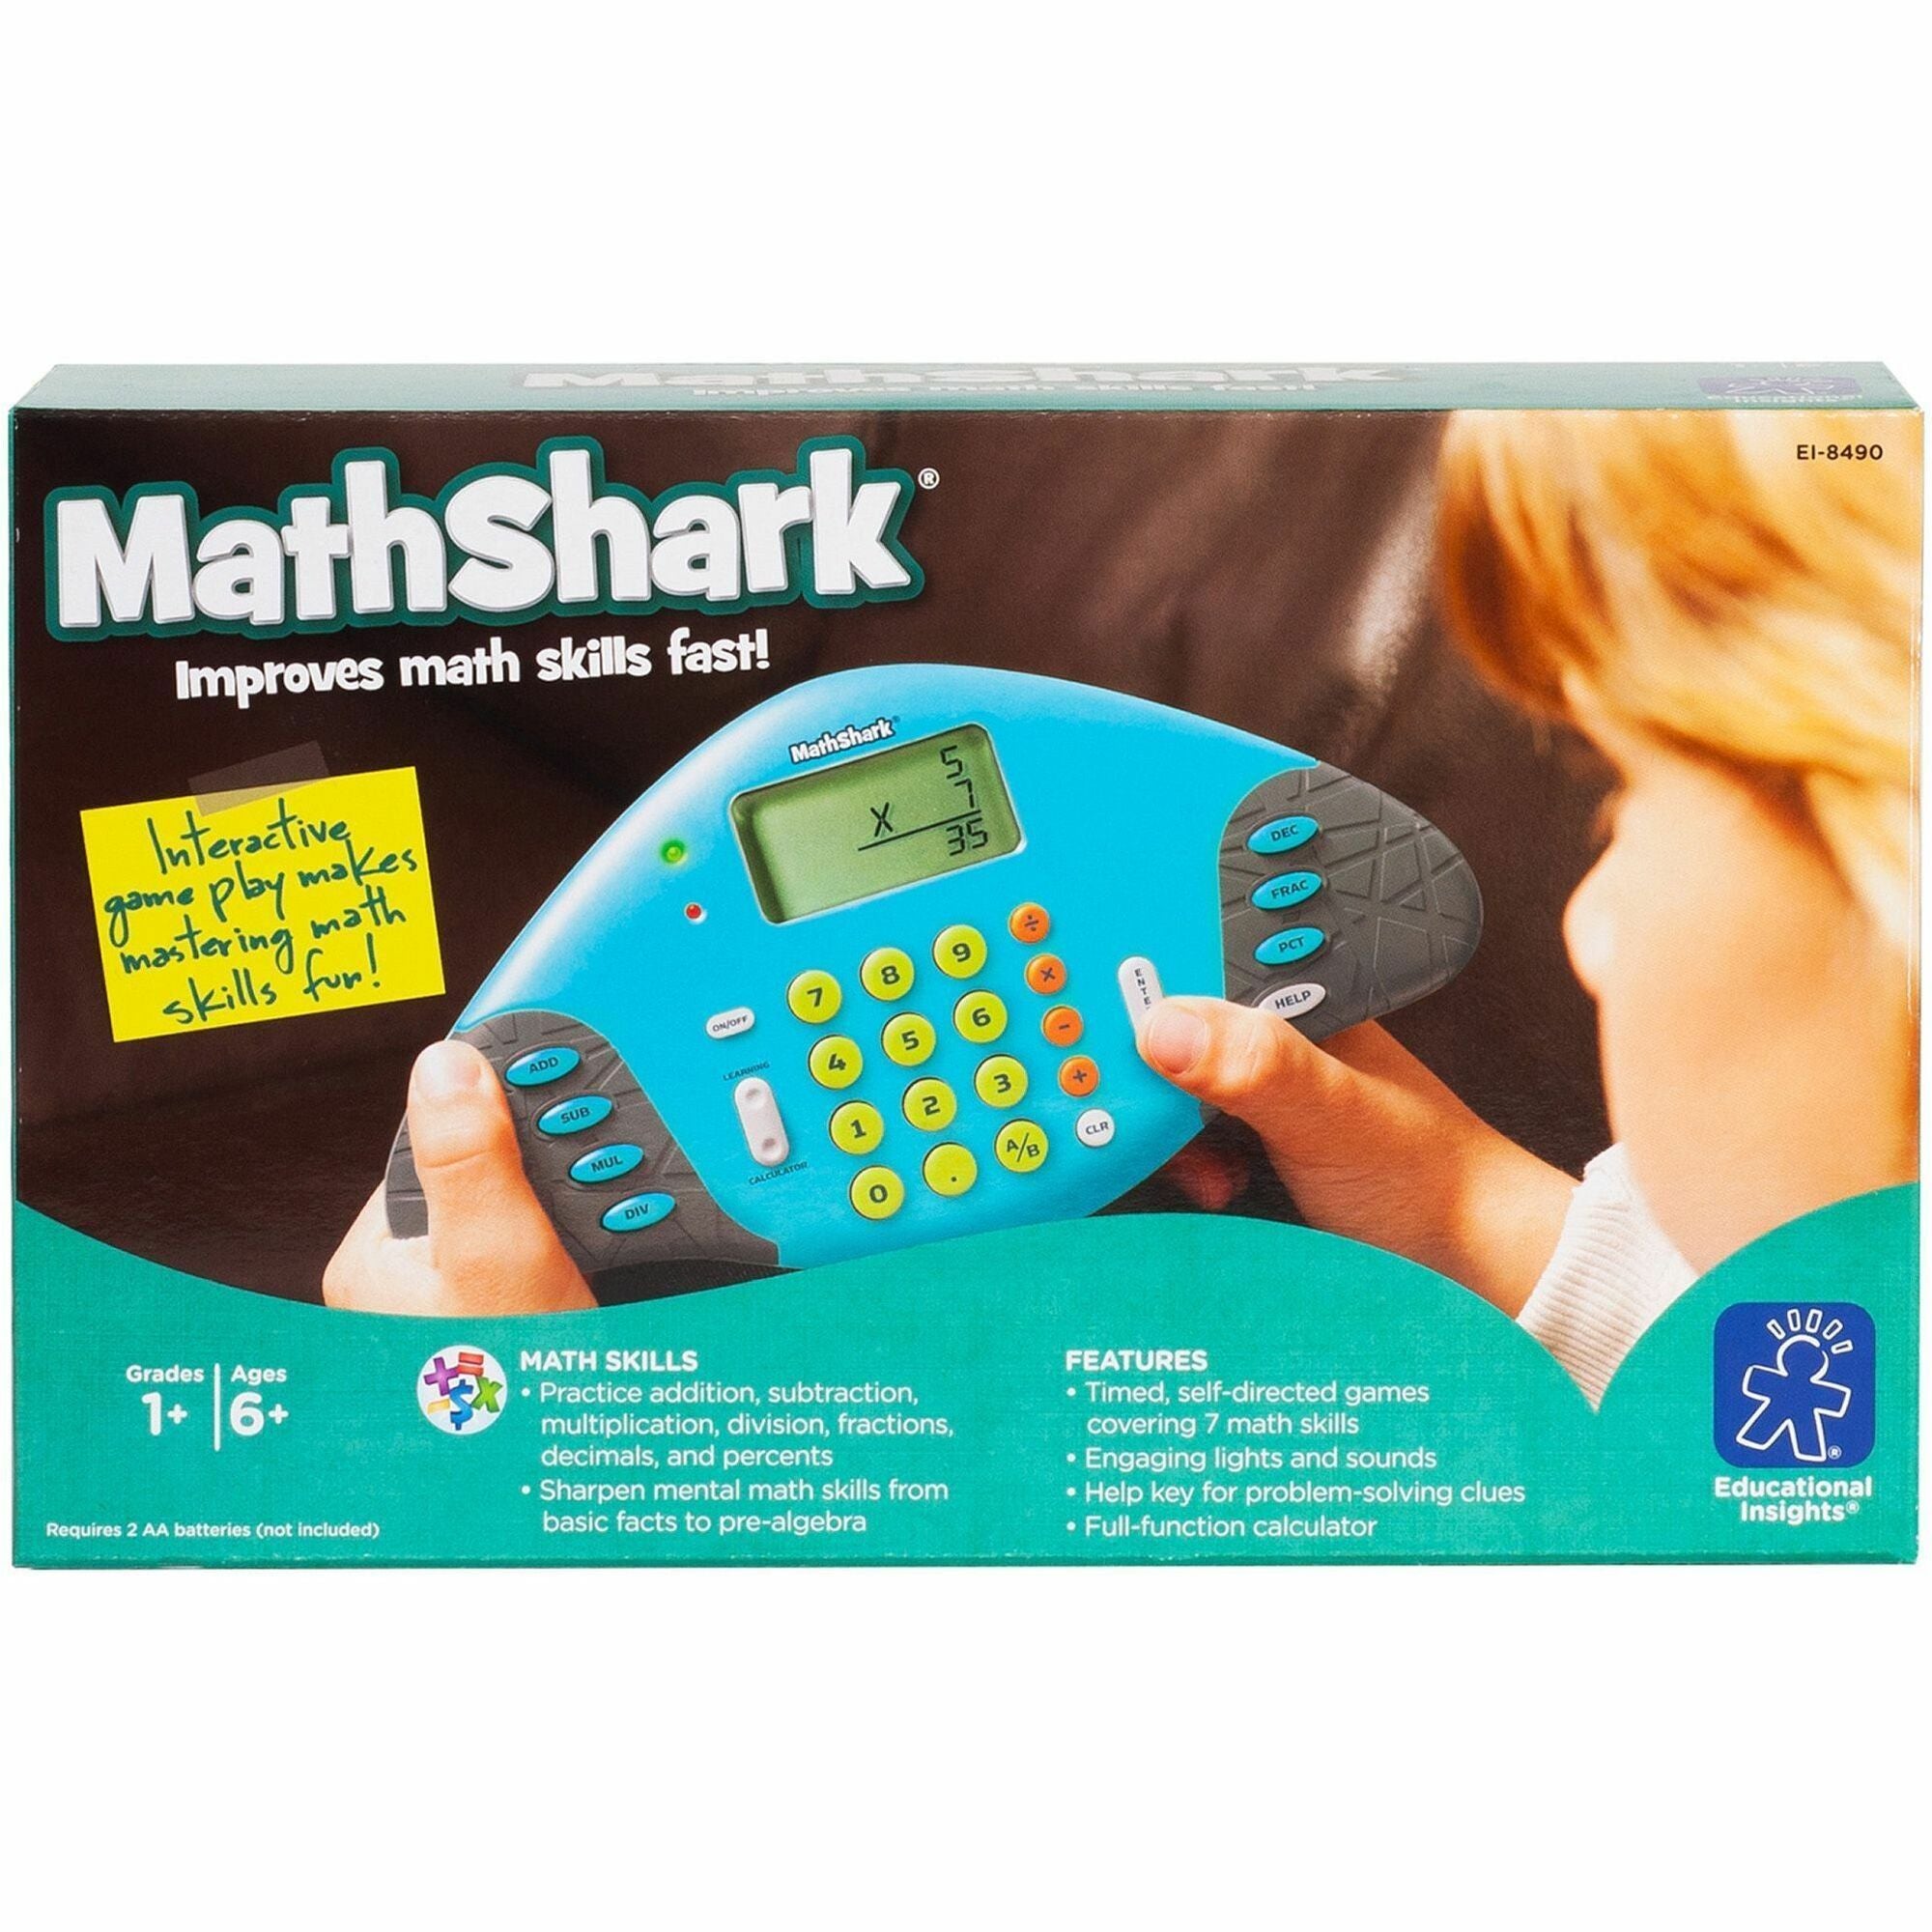 Learning Resources Handheld MathShark Game - Theme/Subject: Learning - Skill Learning: Mathematics, Addition, Subtraction, Multiplication, Division, Fraction, Decimal, Percent, Motivation, Problem Solving - 6 Year & Up - Multi - 1